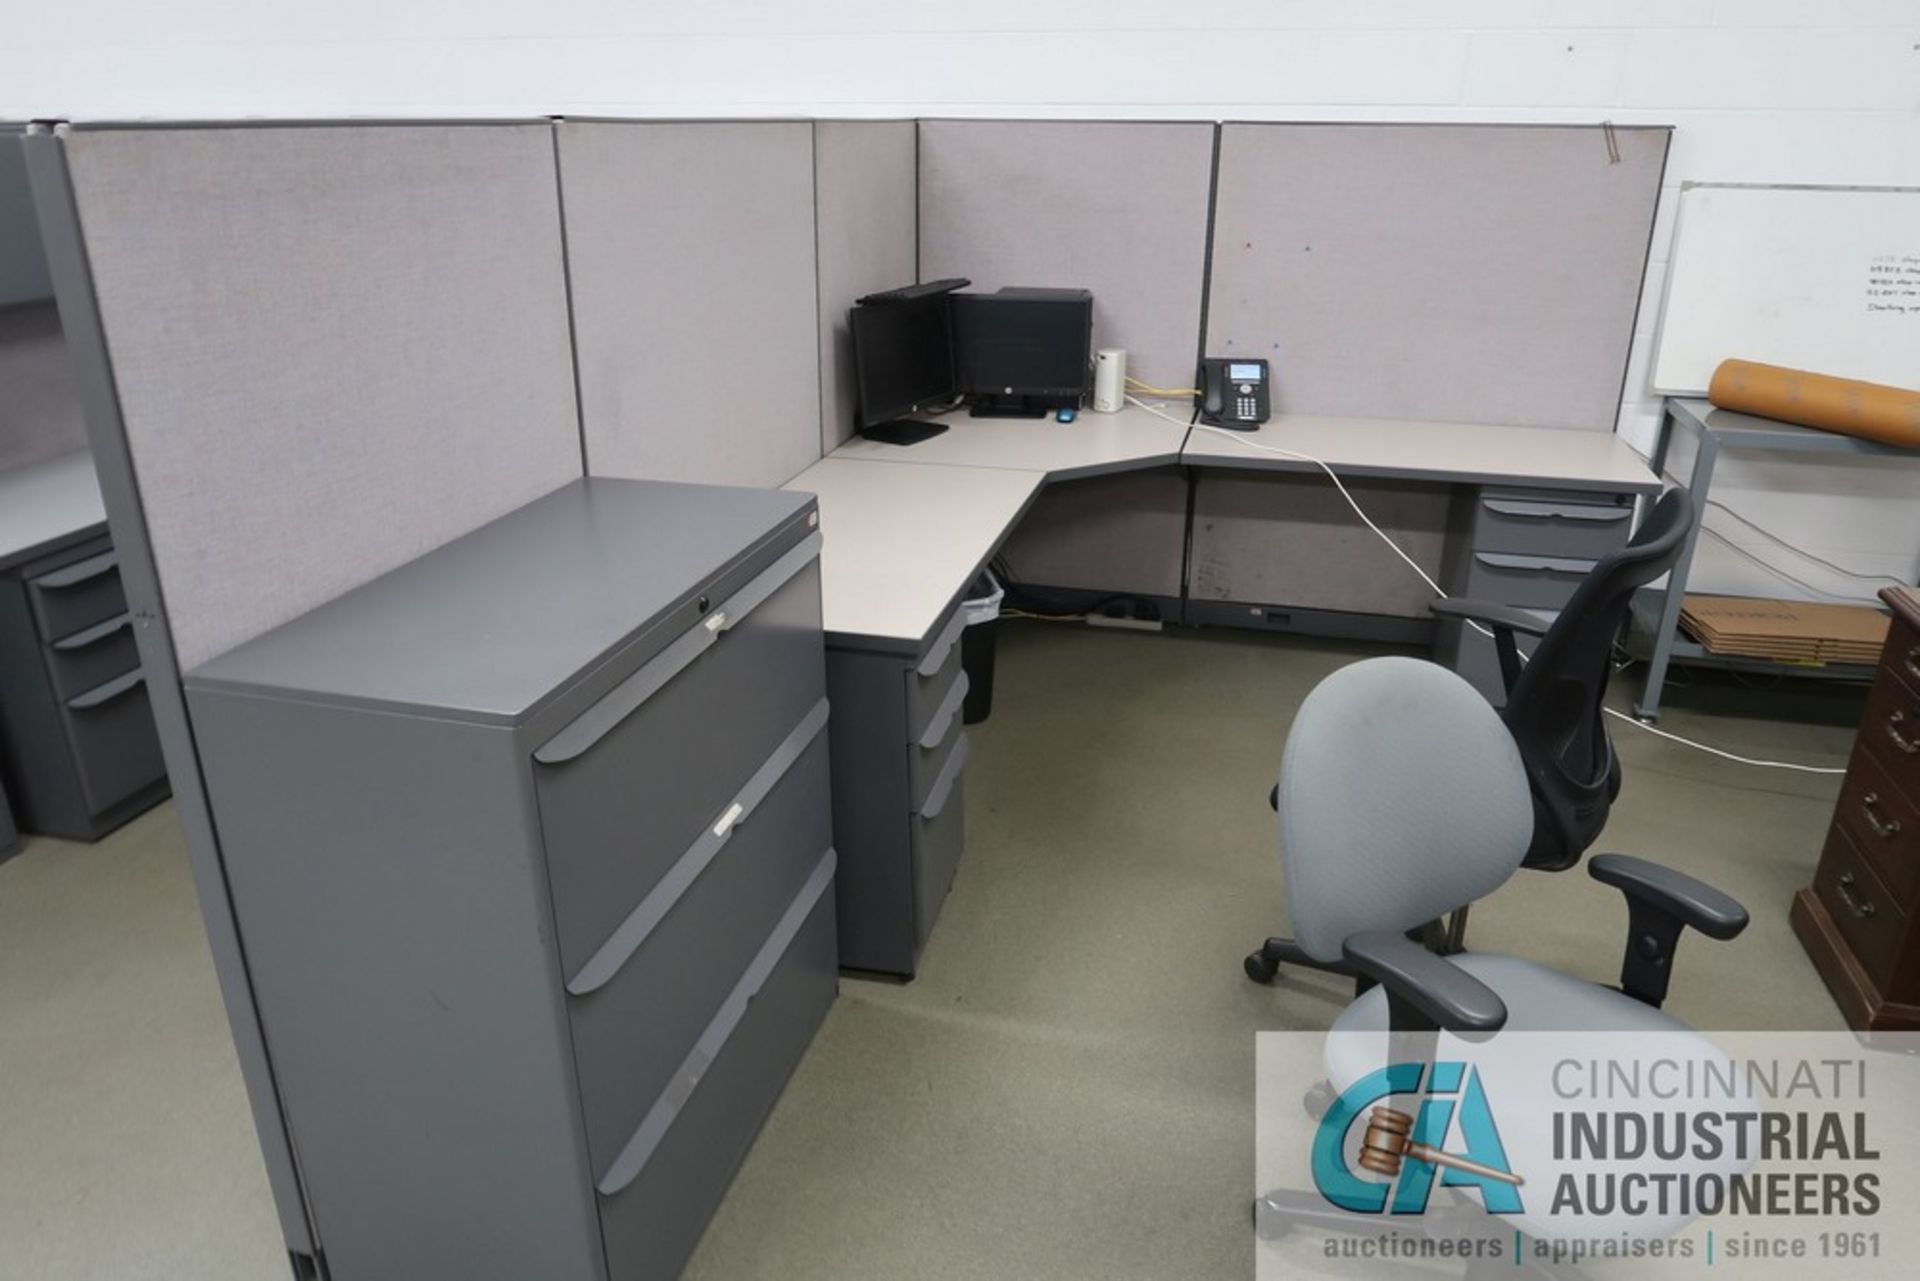 (LOT) 3-PERSON AMERICAN SEATING MODULAR OFFICE WITH L-SHAPED DESK AND OVERHEAD CABINETS, 88" X 118" - Image 2 of 4